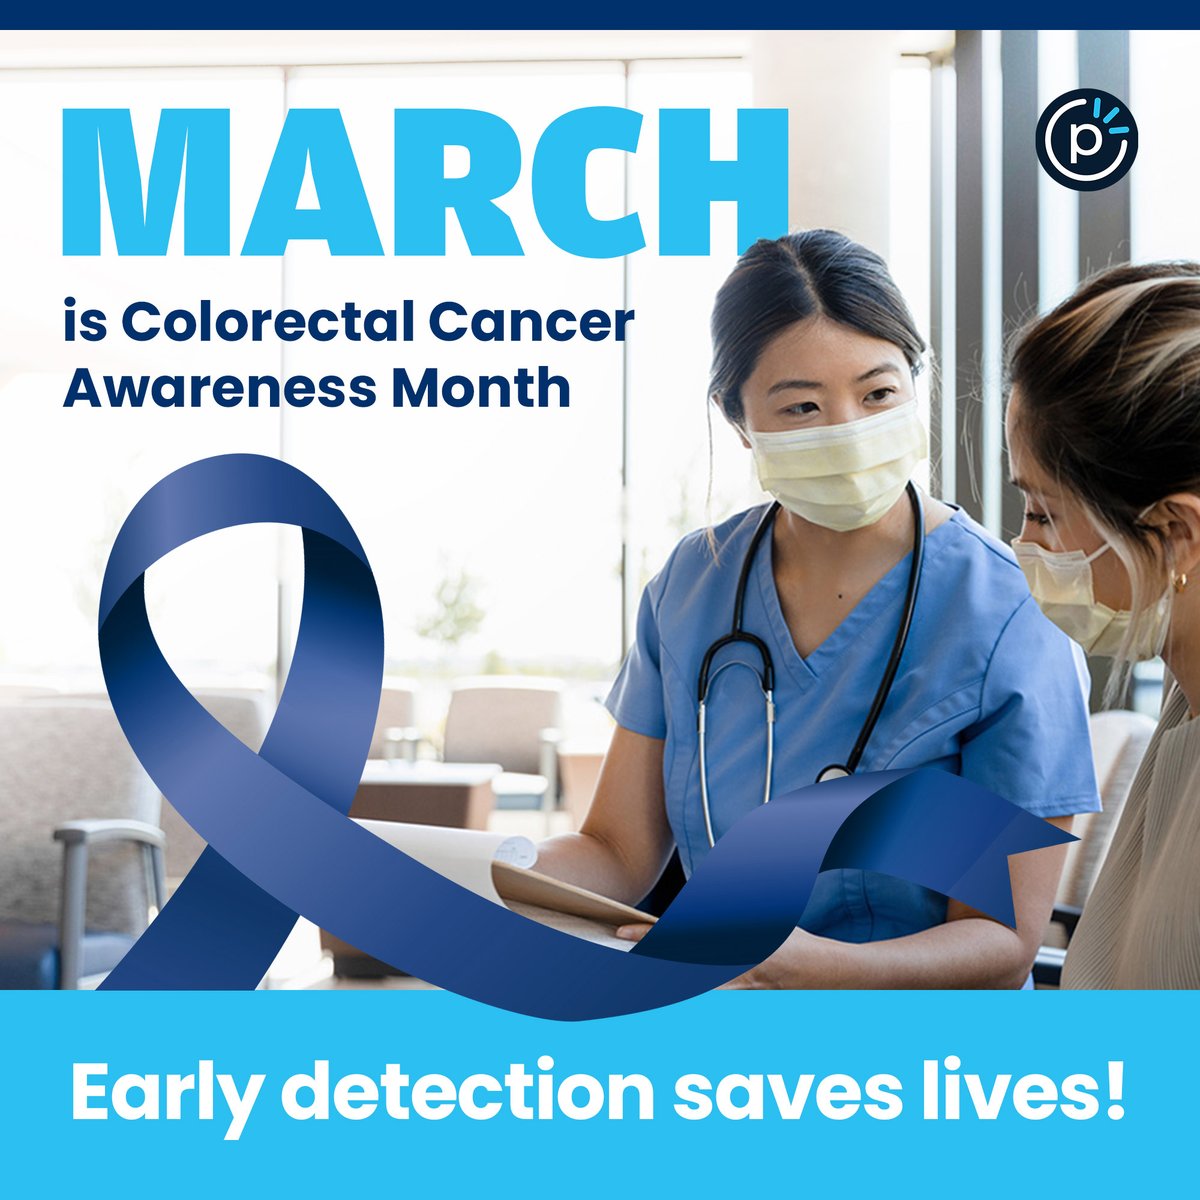 March is #ColorectalCancerAwarenessMonth. As NPs & PAs, you are essential in early detection & prevention. ✅ Stay updated on screening guidelines. ✅ Empower with knowledge. Your actions save lives. How do you enhance care? #HealthcareHeroes #PreventiveCare